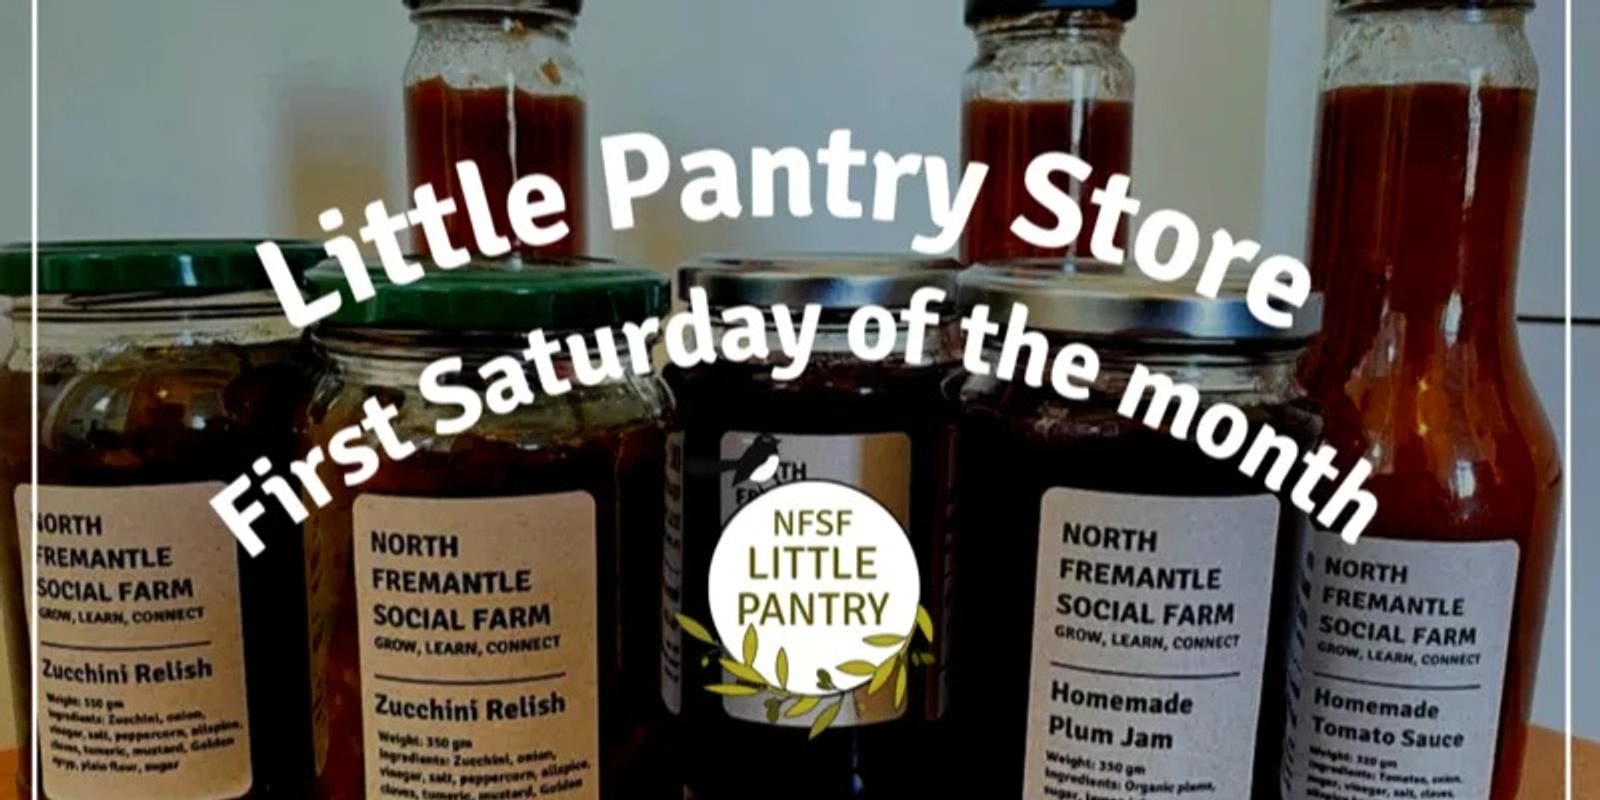 Banner image for Little Pantry Store and Welcome Walkthrough